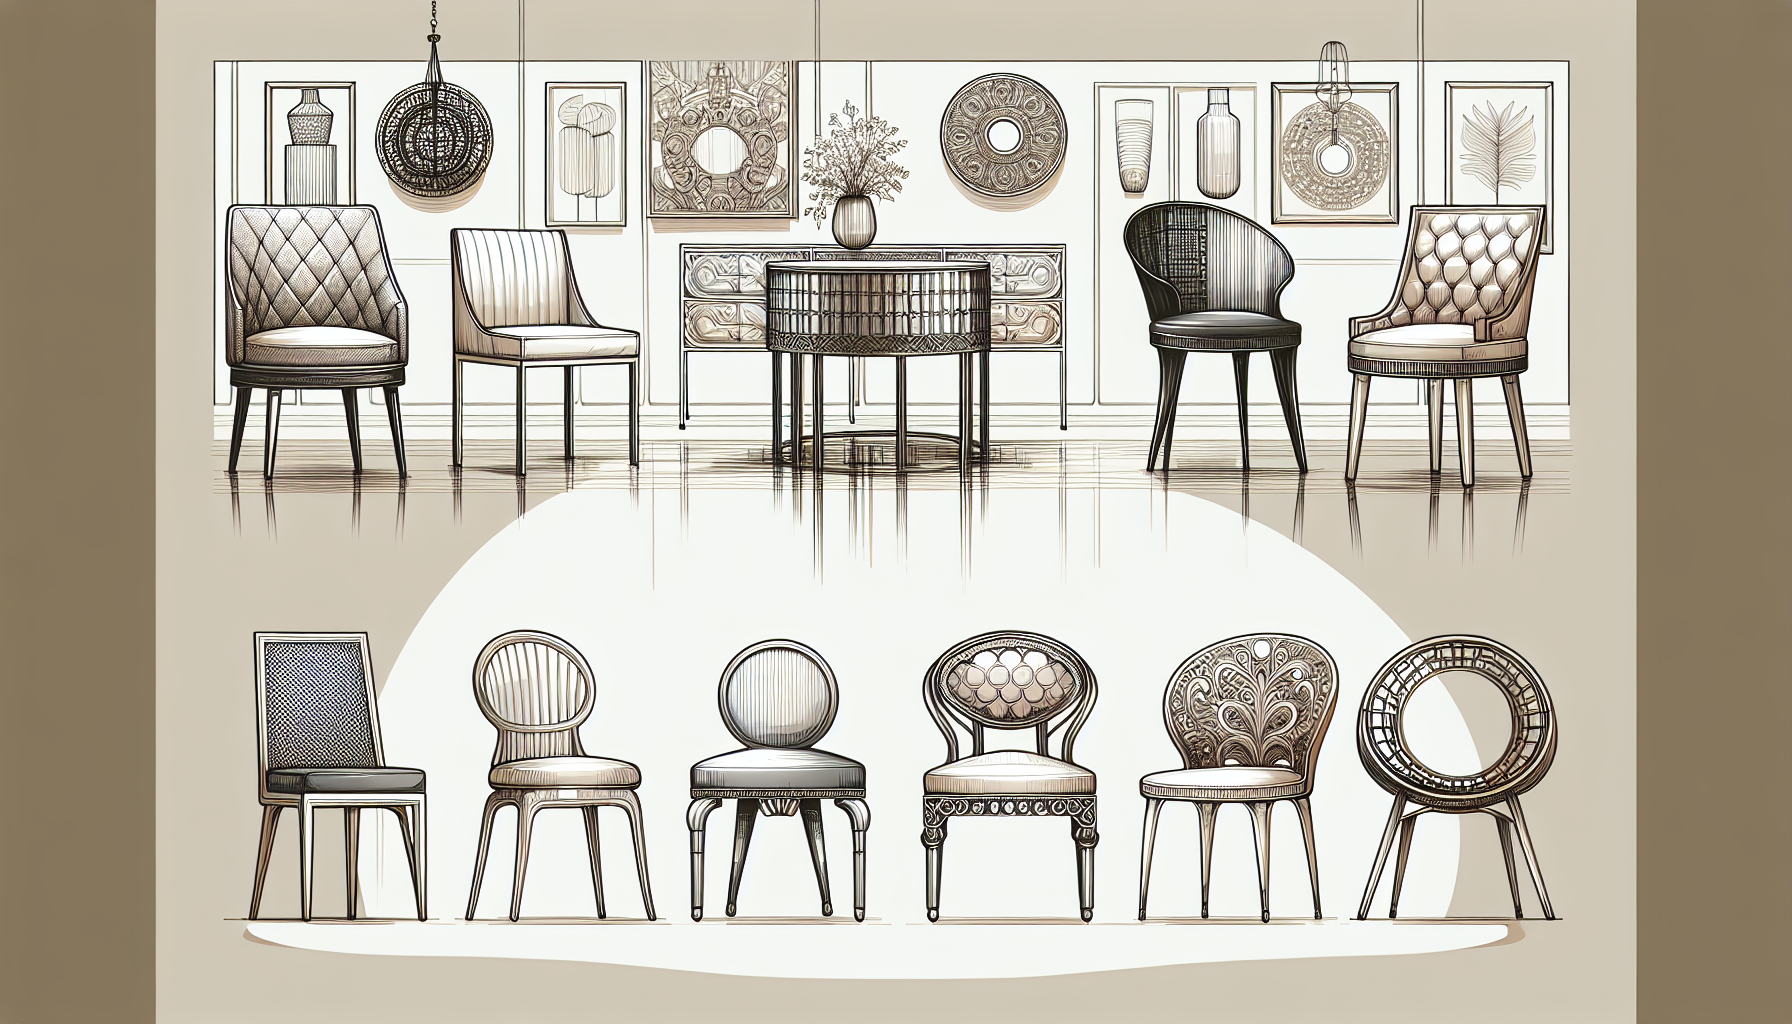 Variety of dining chair styles for different spaces